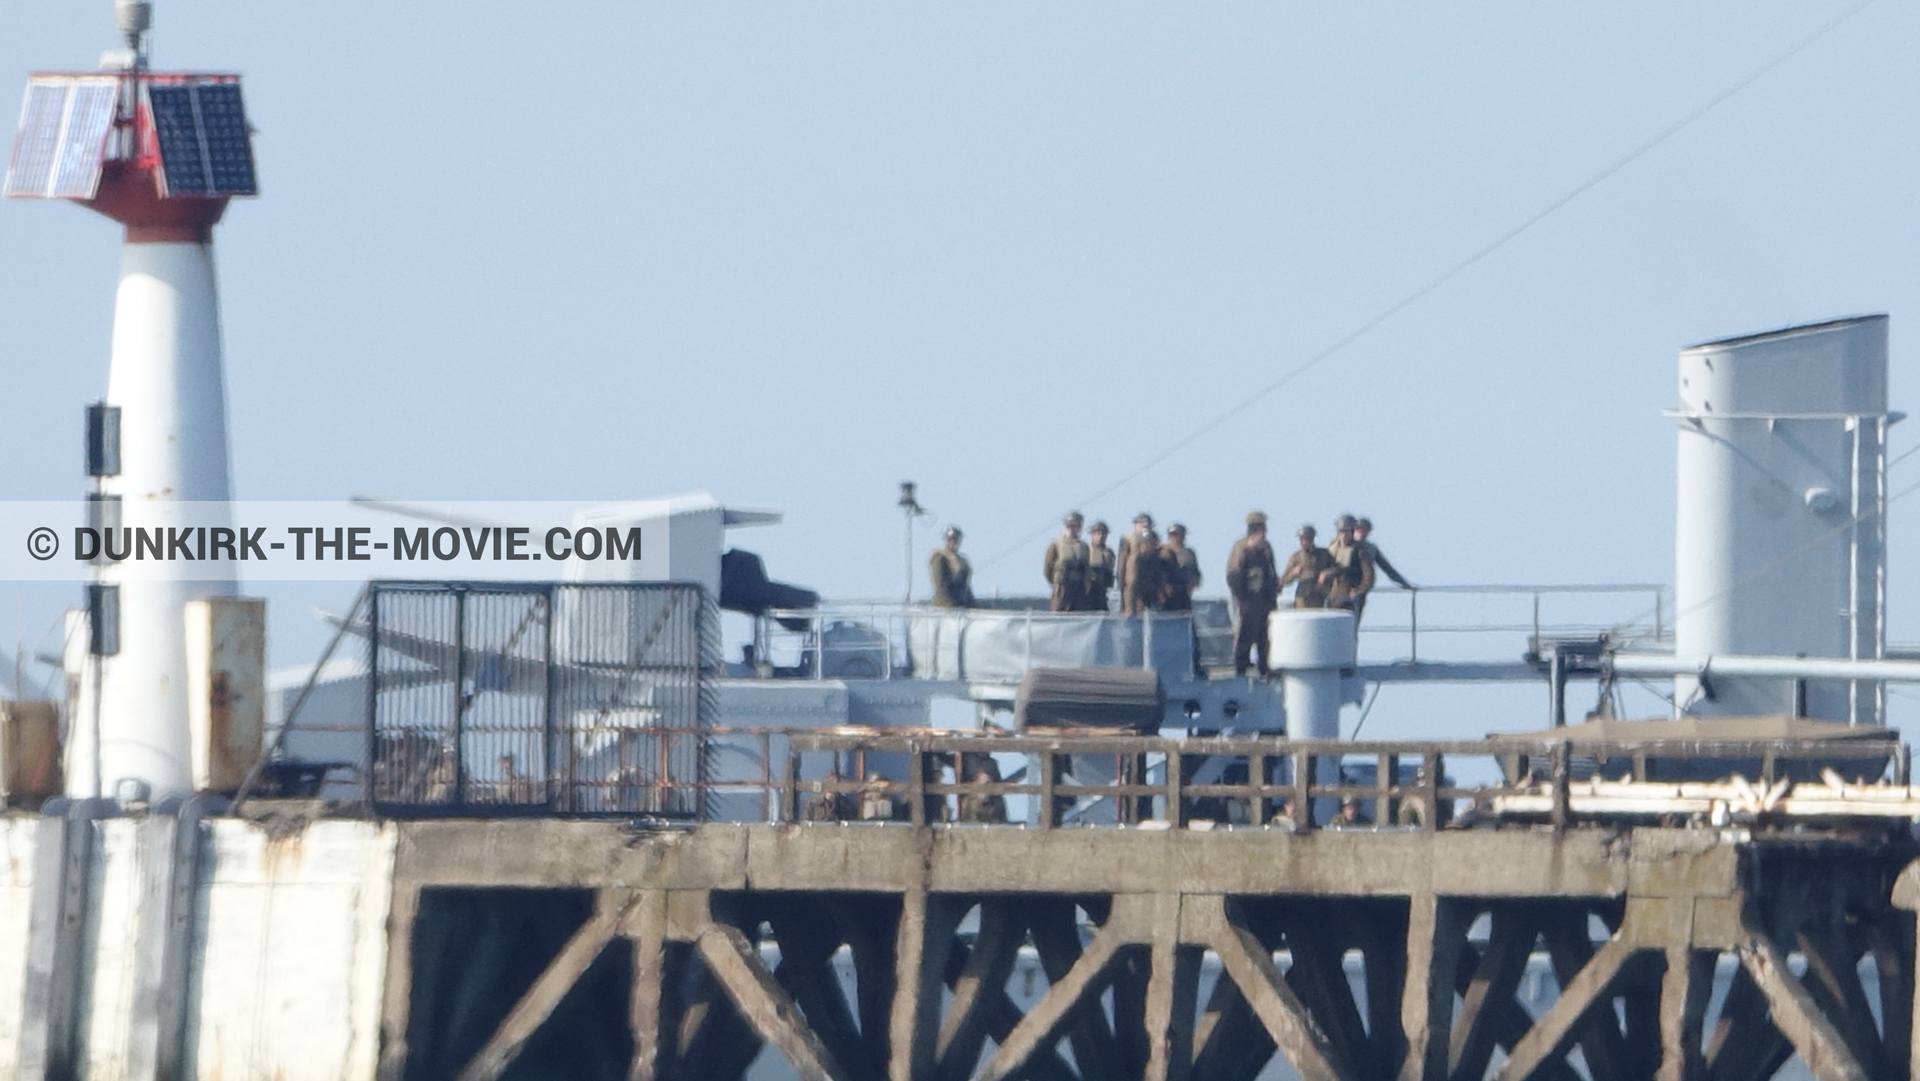 Picture with blue sky, supernumeraries,  from behind the scene of the Dunkirk movie by Nolan